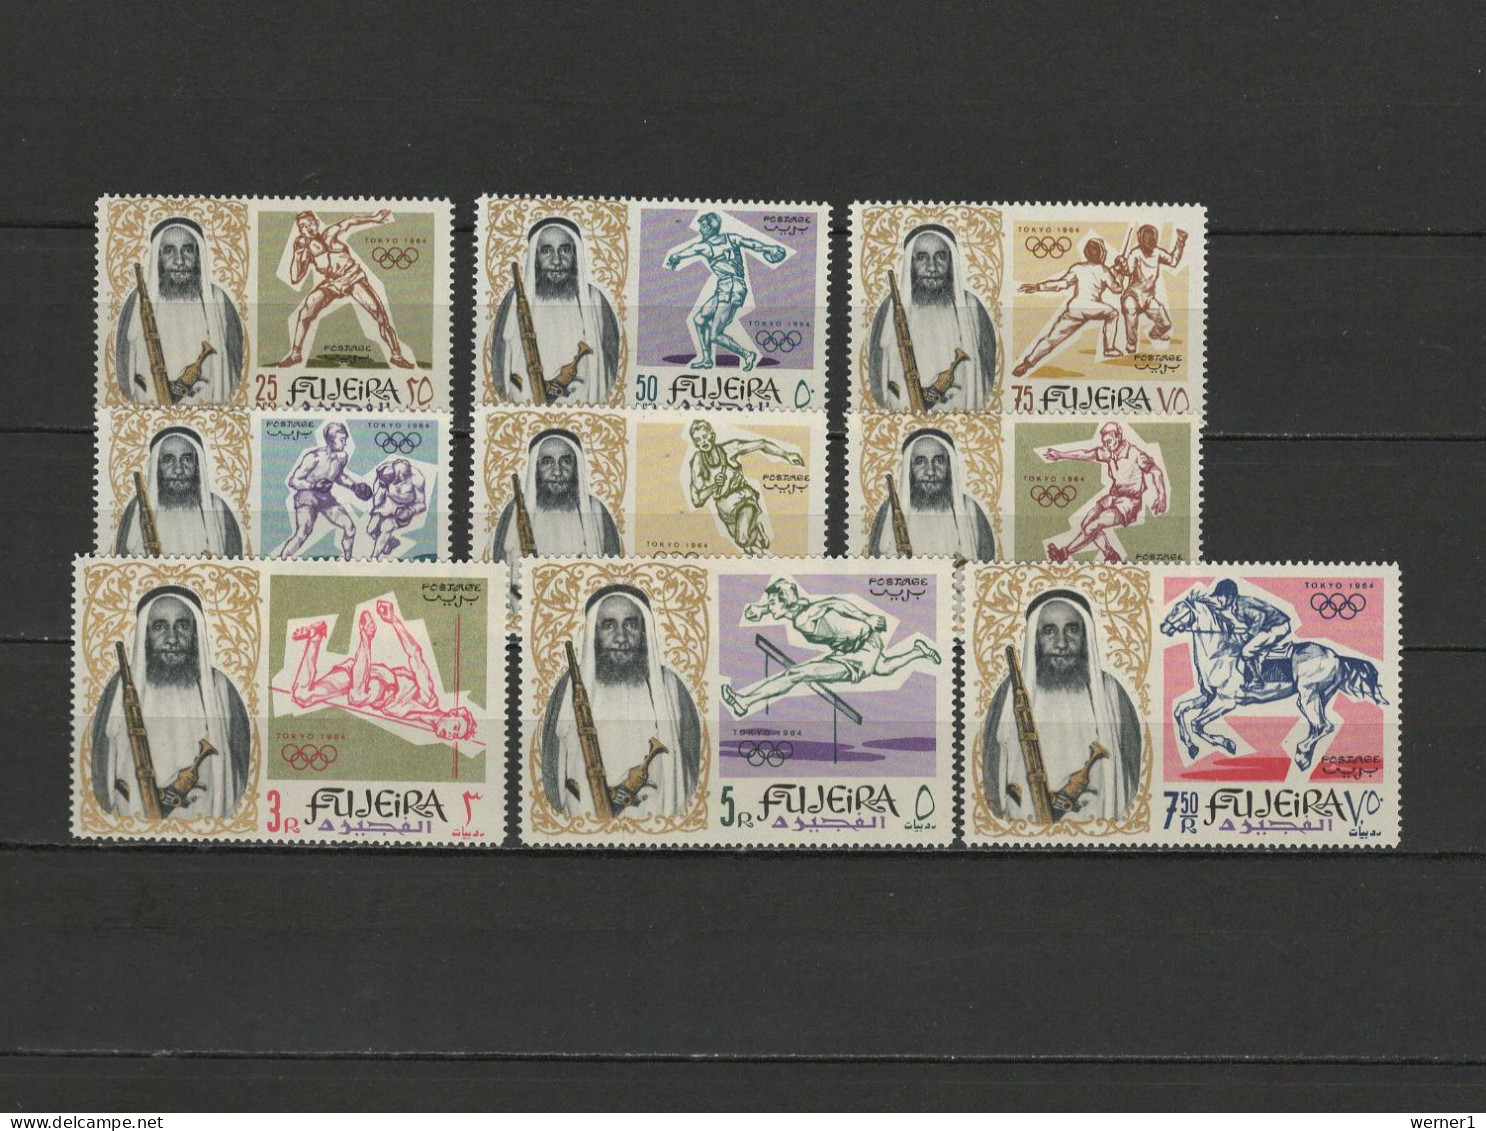 Fujeira 1964 Olympic Games Tokyo, Fencing, Football Soccer, Boxing, Athletics, Equestrian Set Of 9 MNH - Ete 1964: Tokyo